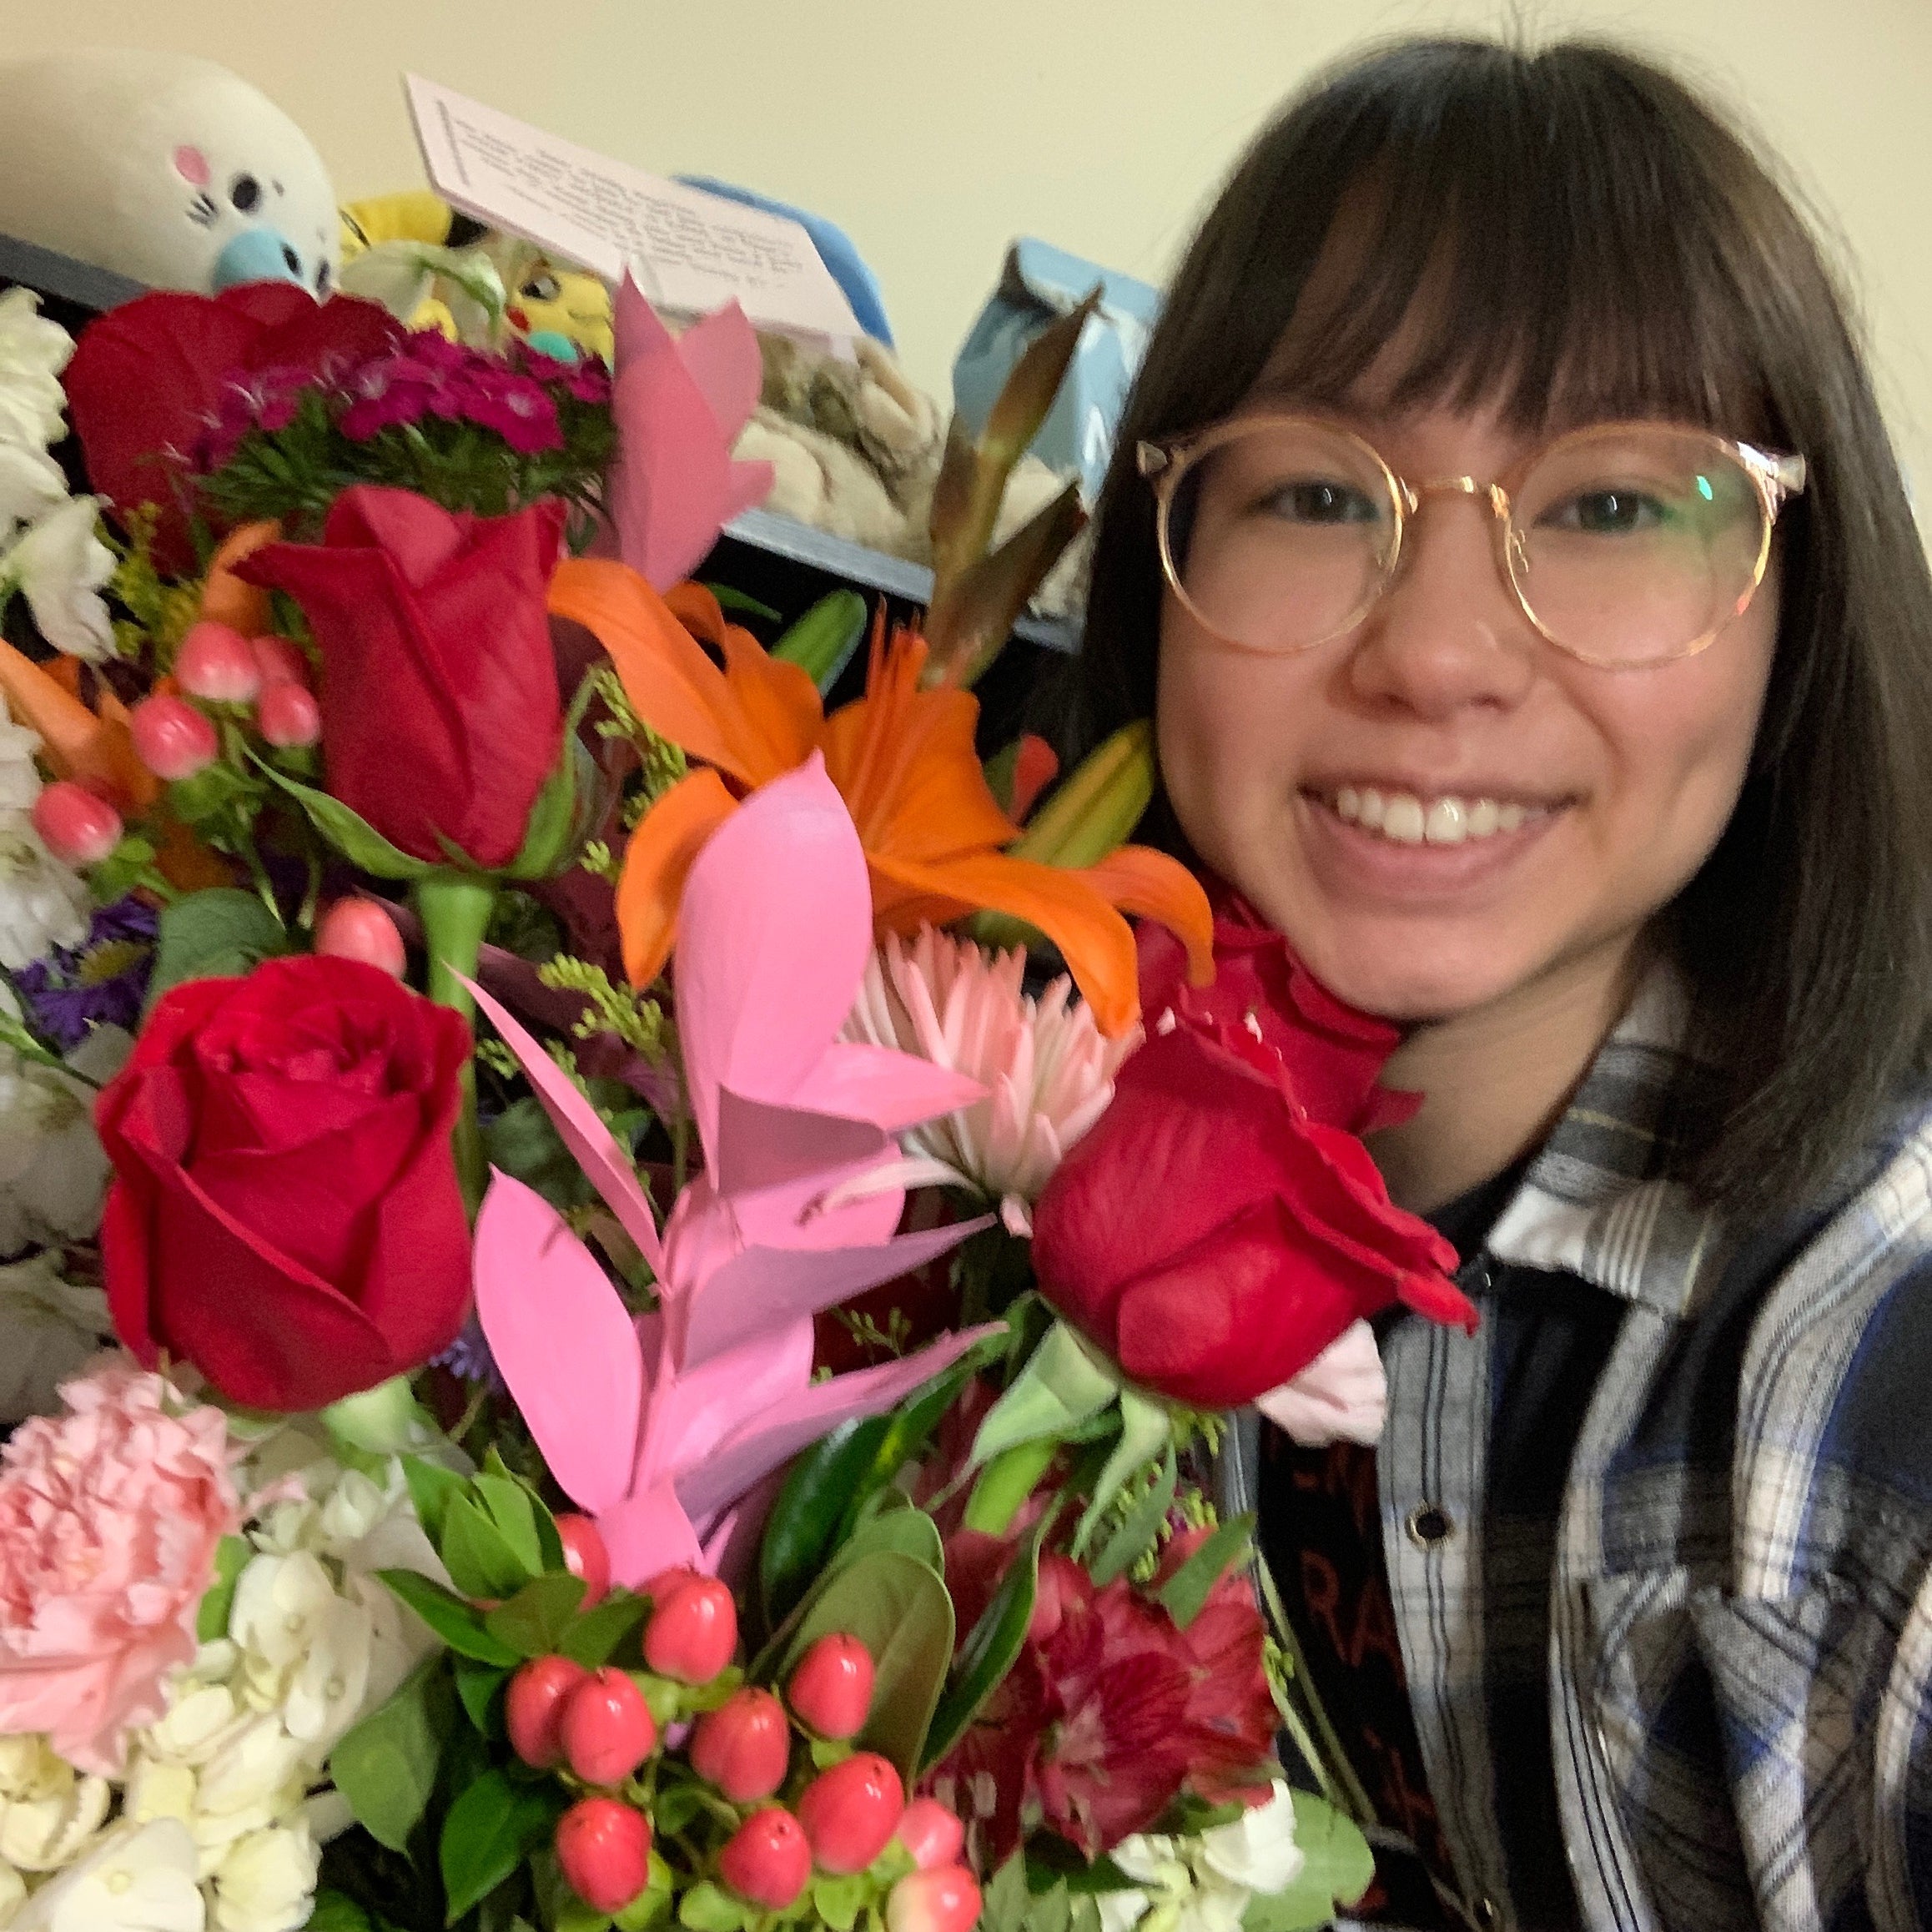 Appreciative photo submission from the recipient for Florist's Choice Daily Deal